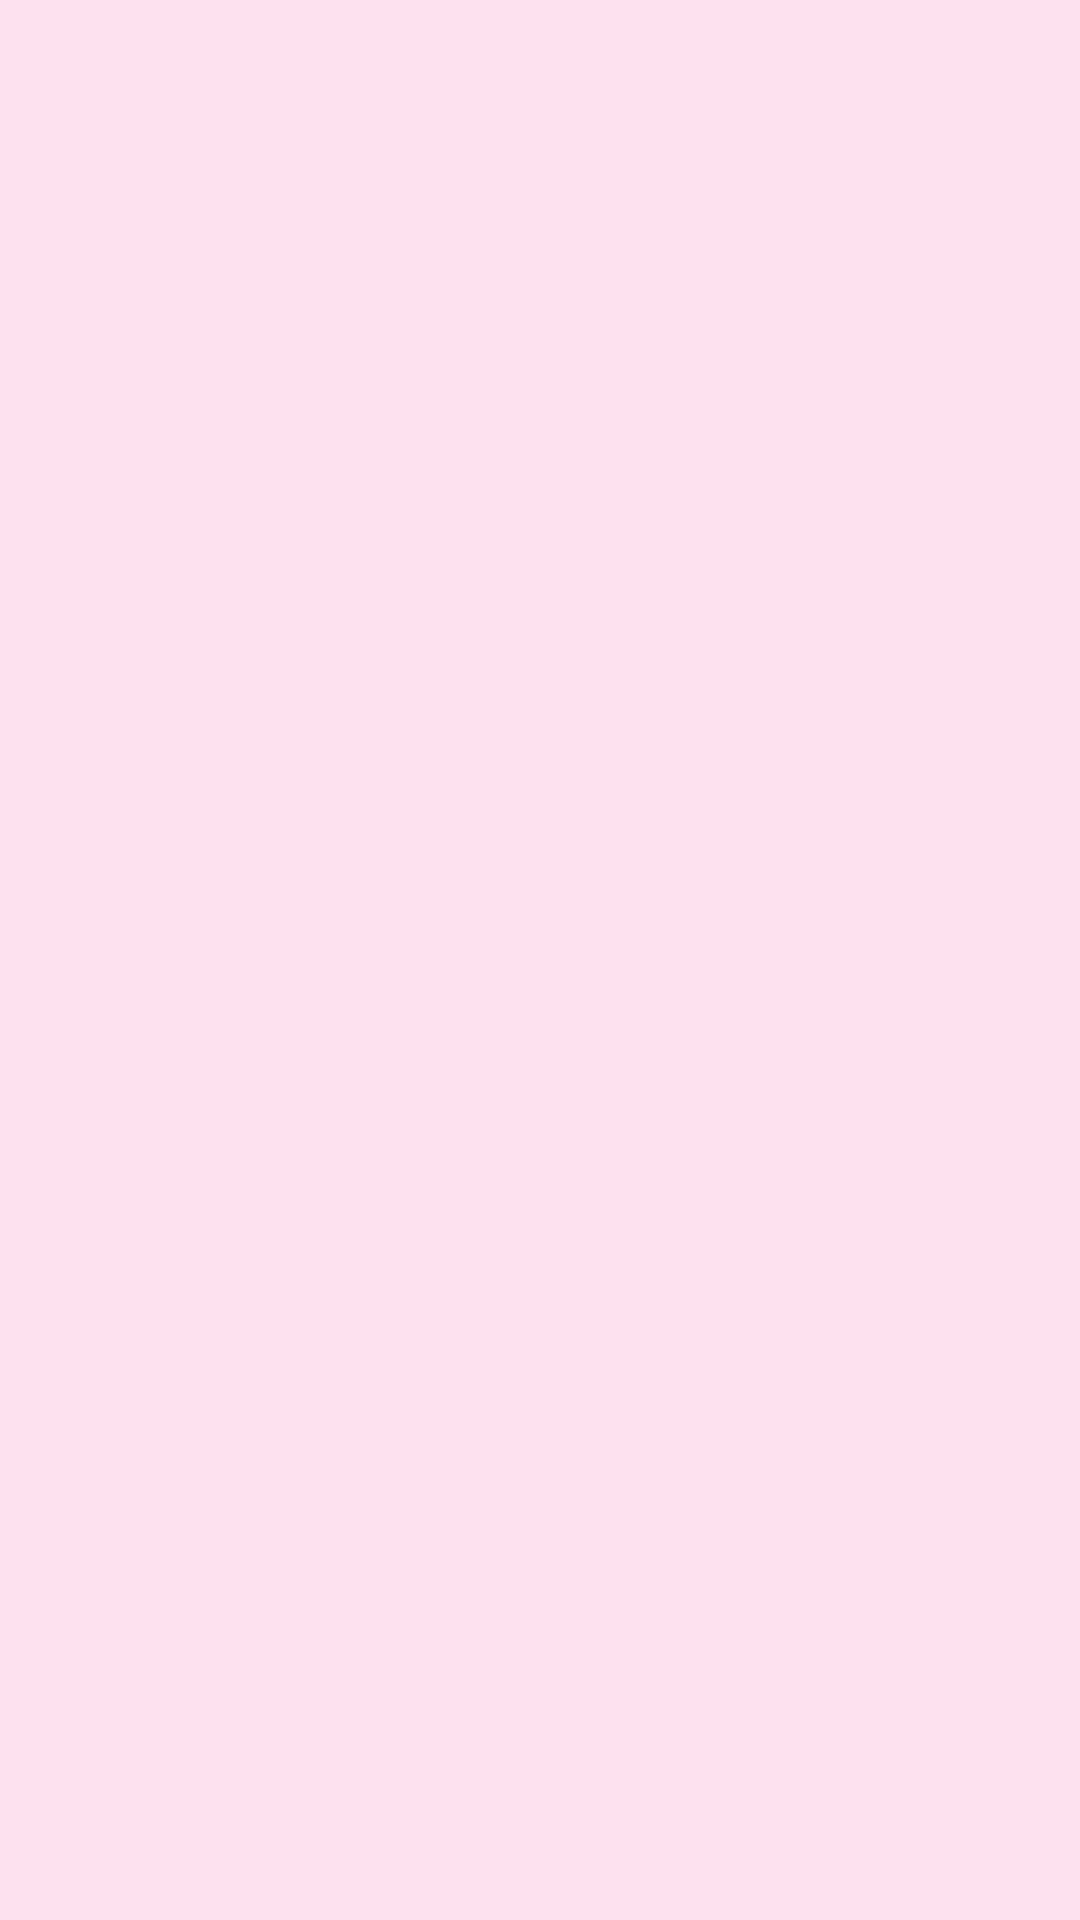 Plain Pink Backround Best Of Plain Baby Pink Wallpaper iPhone Wallpaper for You of The Hudson